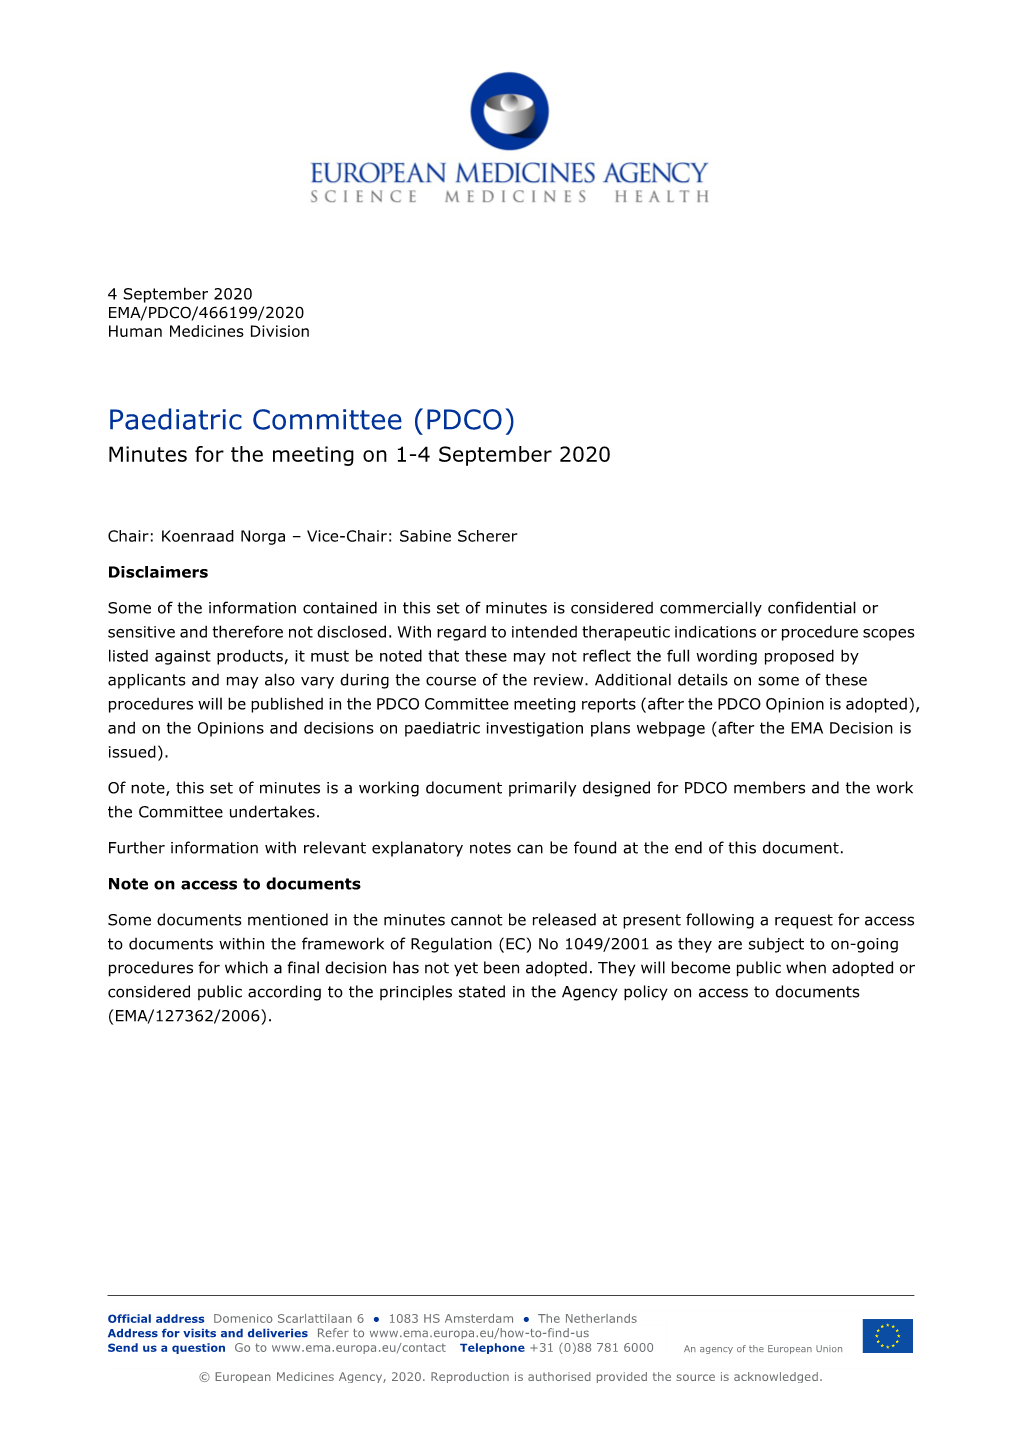 PDCO Minutes of the 1-4 September 2020 Meeting